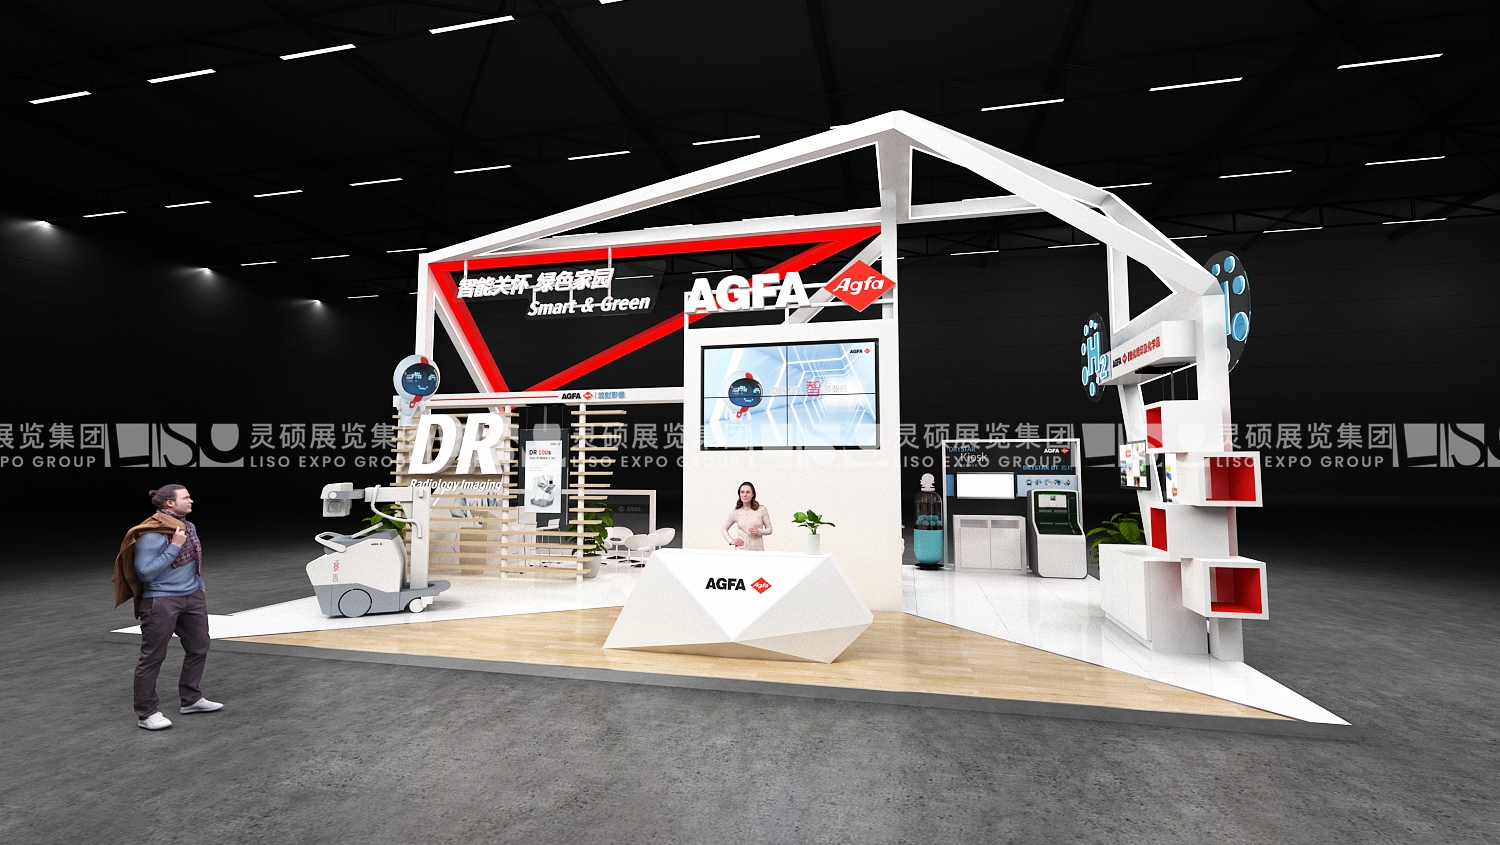 Agfa- CIIE Booth Design and Construction Case